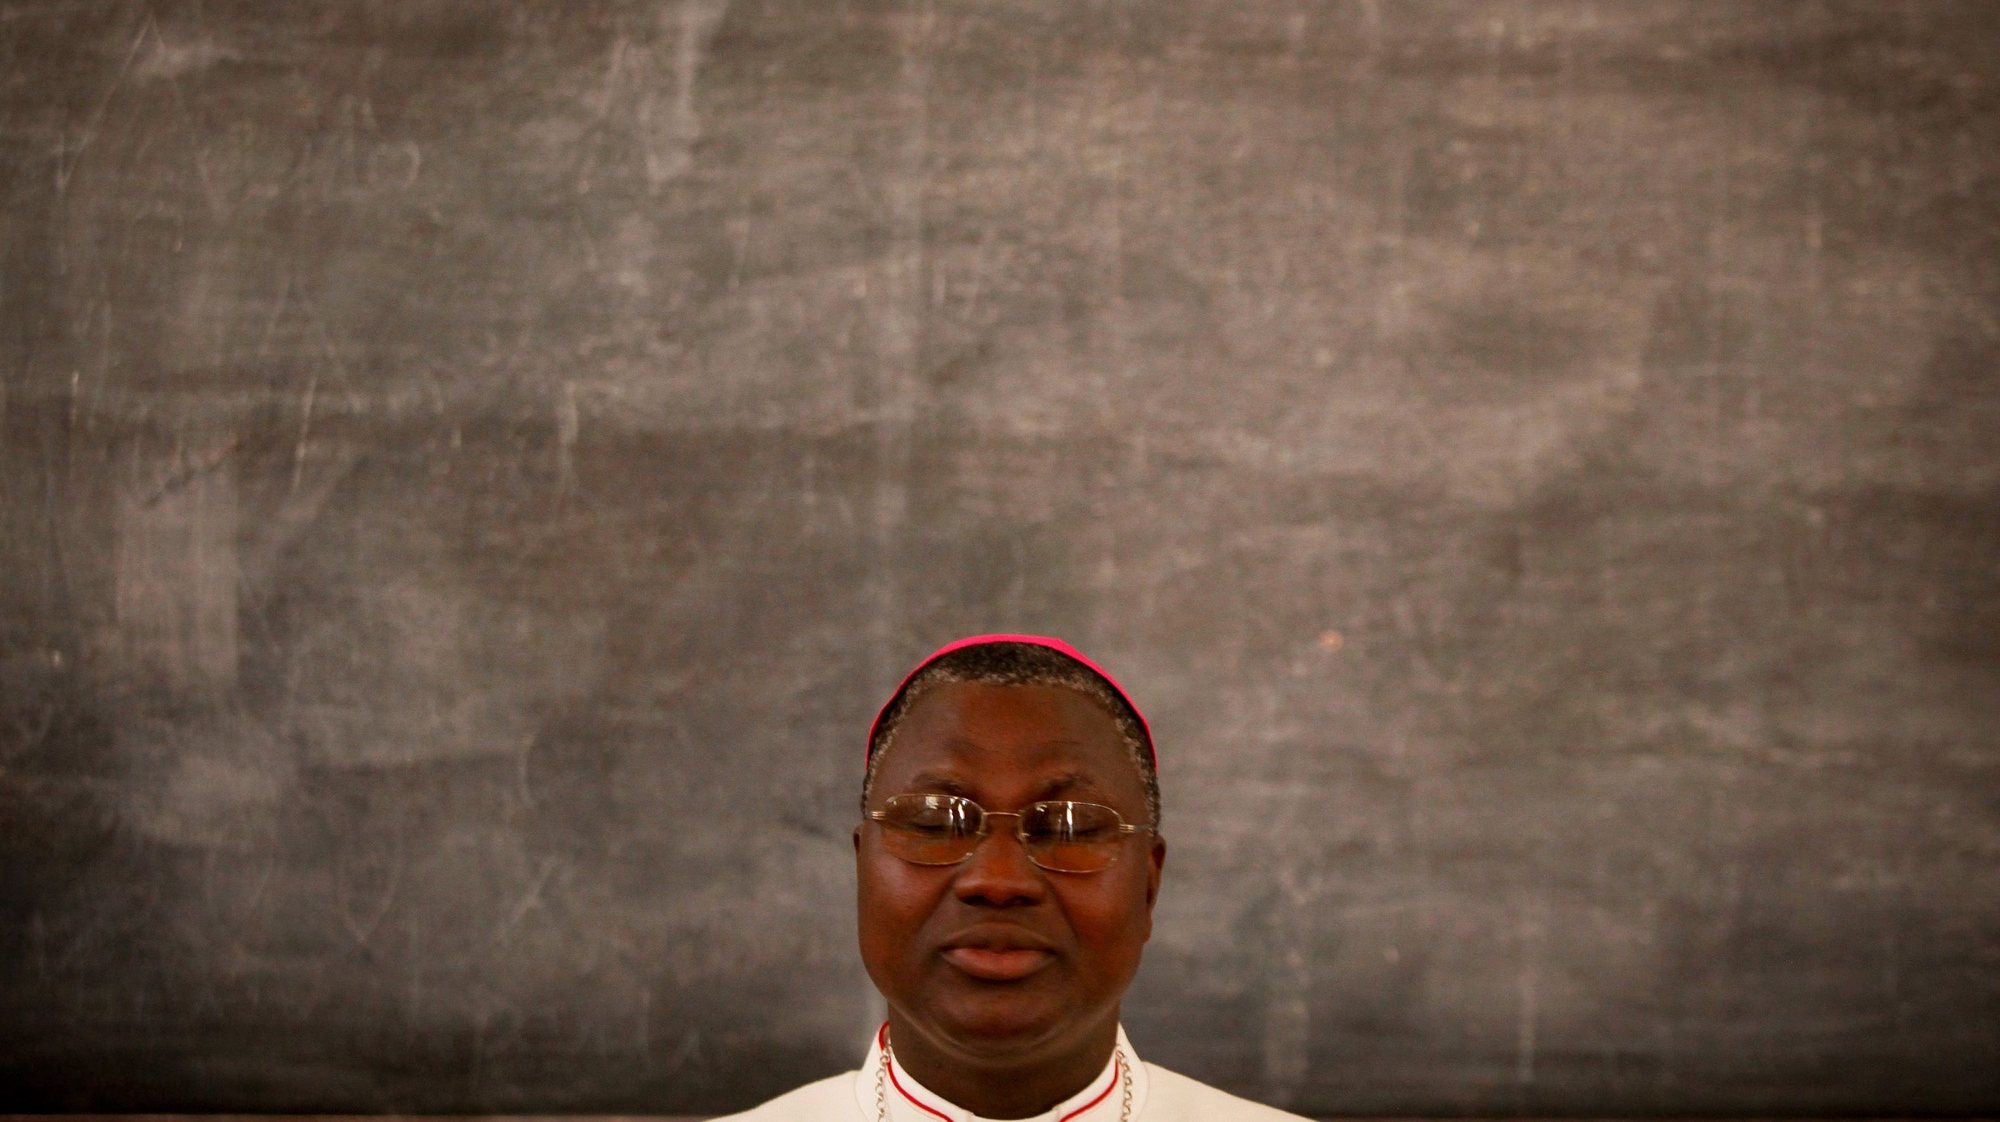 Assistant Bishop of Bissau, Don Jose Lampra Ca, during a press conference held at the Bishopcourt in Bissau, presenting the position of the Catholic Church from Guinea Bissau regarding the current political situation 17 April 2012. On Thursday evening a group of Guinean military attacked the residence of Prime Minister and presidential candidate, Carlos Gomes Junior, arresting him and the President, Raimundo Pereira and held various strategic points in the capital of Guinea-Bissau. The action was justified by a self-Military Command, with no clear identification of who is in charge, still all the main generals of the Guinean Army have been seen arriving and leaving the meeting places, for that reason at this point the belief is that the coup d&#039;etat is actually done by the Guinean Bissau Army and not by any particular faction or group. These events preceded the beginning of the campaign for the second round of the presidential election scheduled for April 29. ANDRE KOSTERS/LUSA